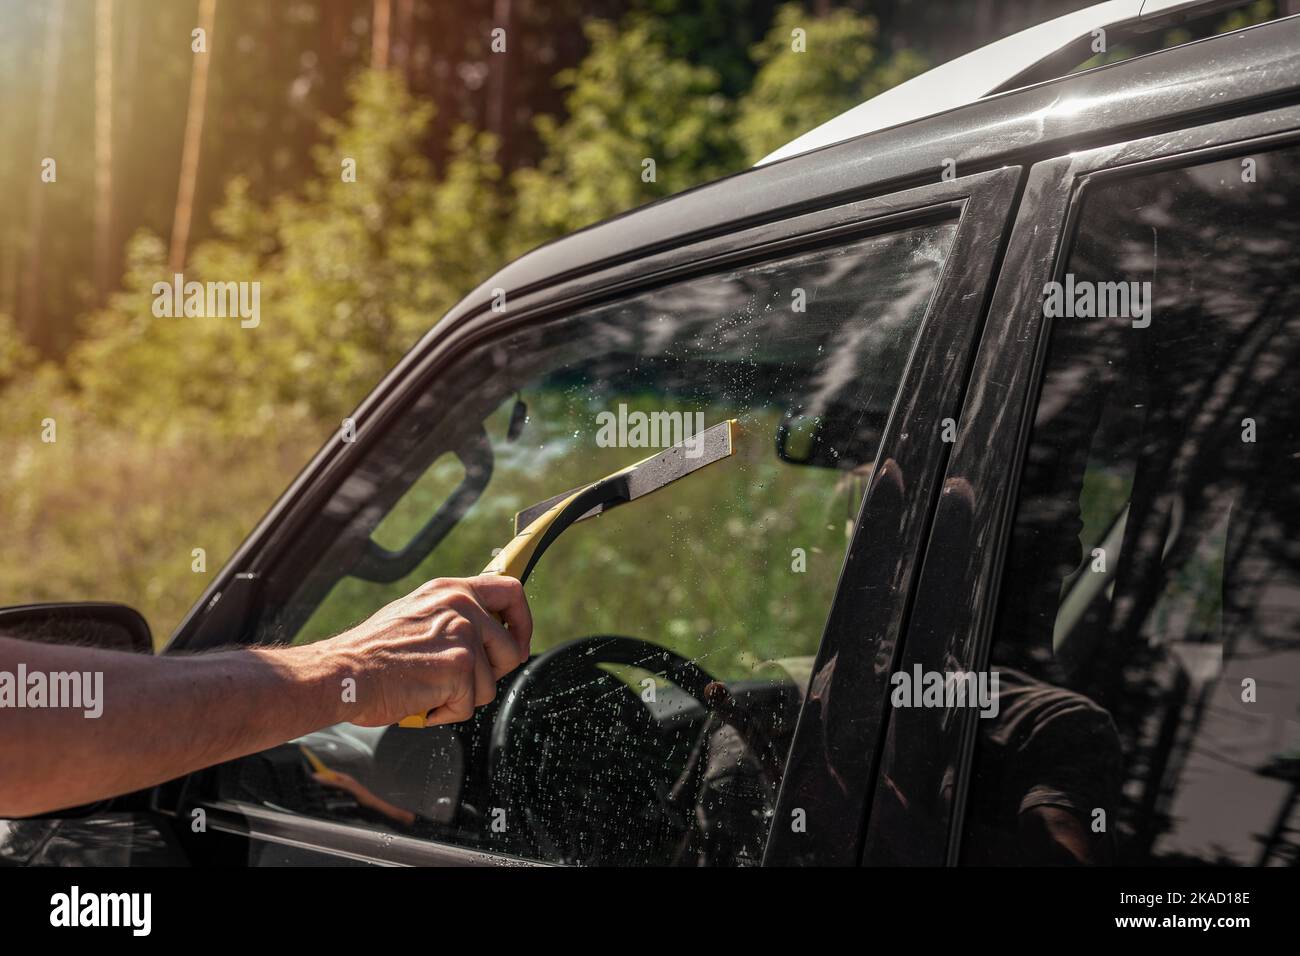 Male hand with car cleaner cleaning auto window in nature. Stock Photo